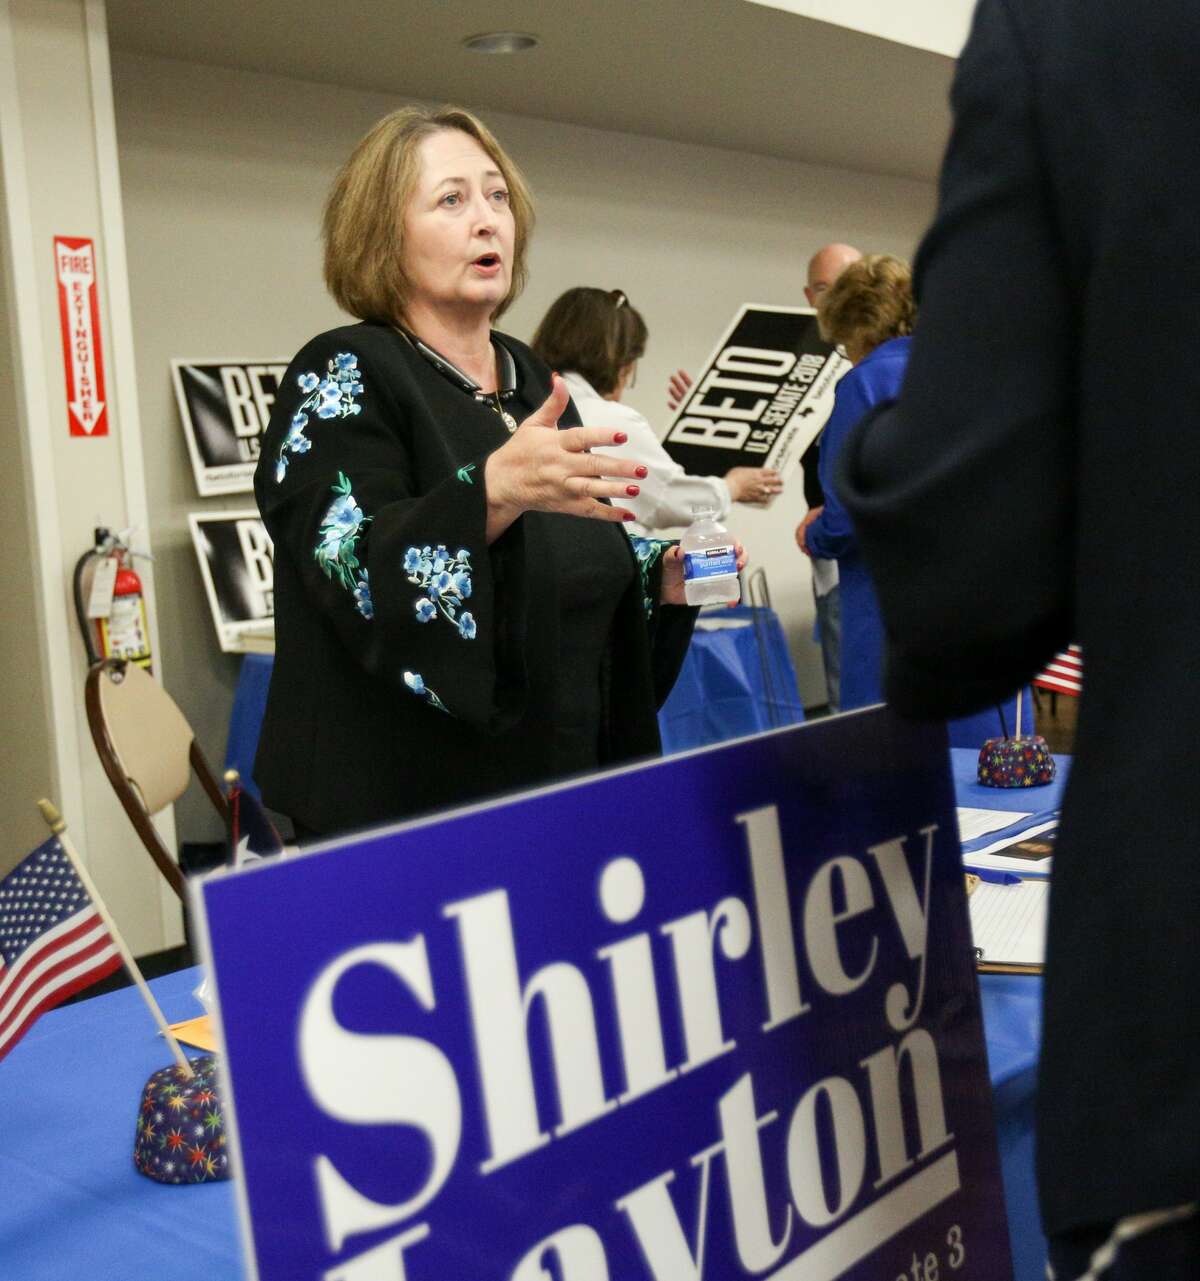 Shirley Layton, candidate for state Sen. District 3, speaks with residents during the meet and greet with state and local Democratic Party candidates on Sunday, Feb. 18, 2018, at the Activity Center in Conroe.